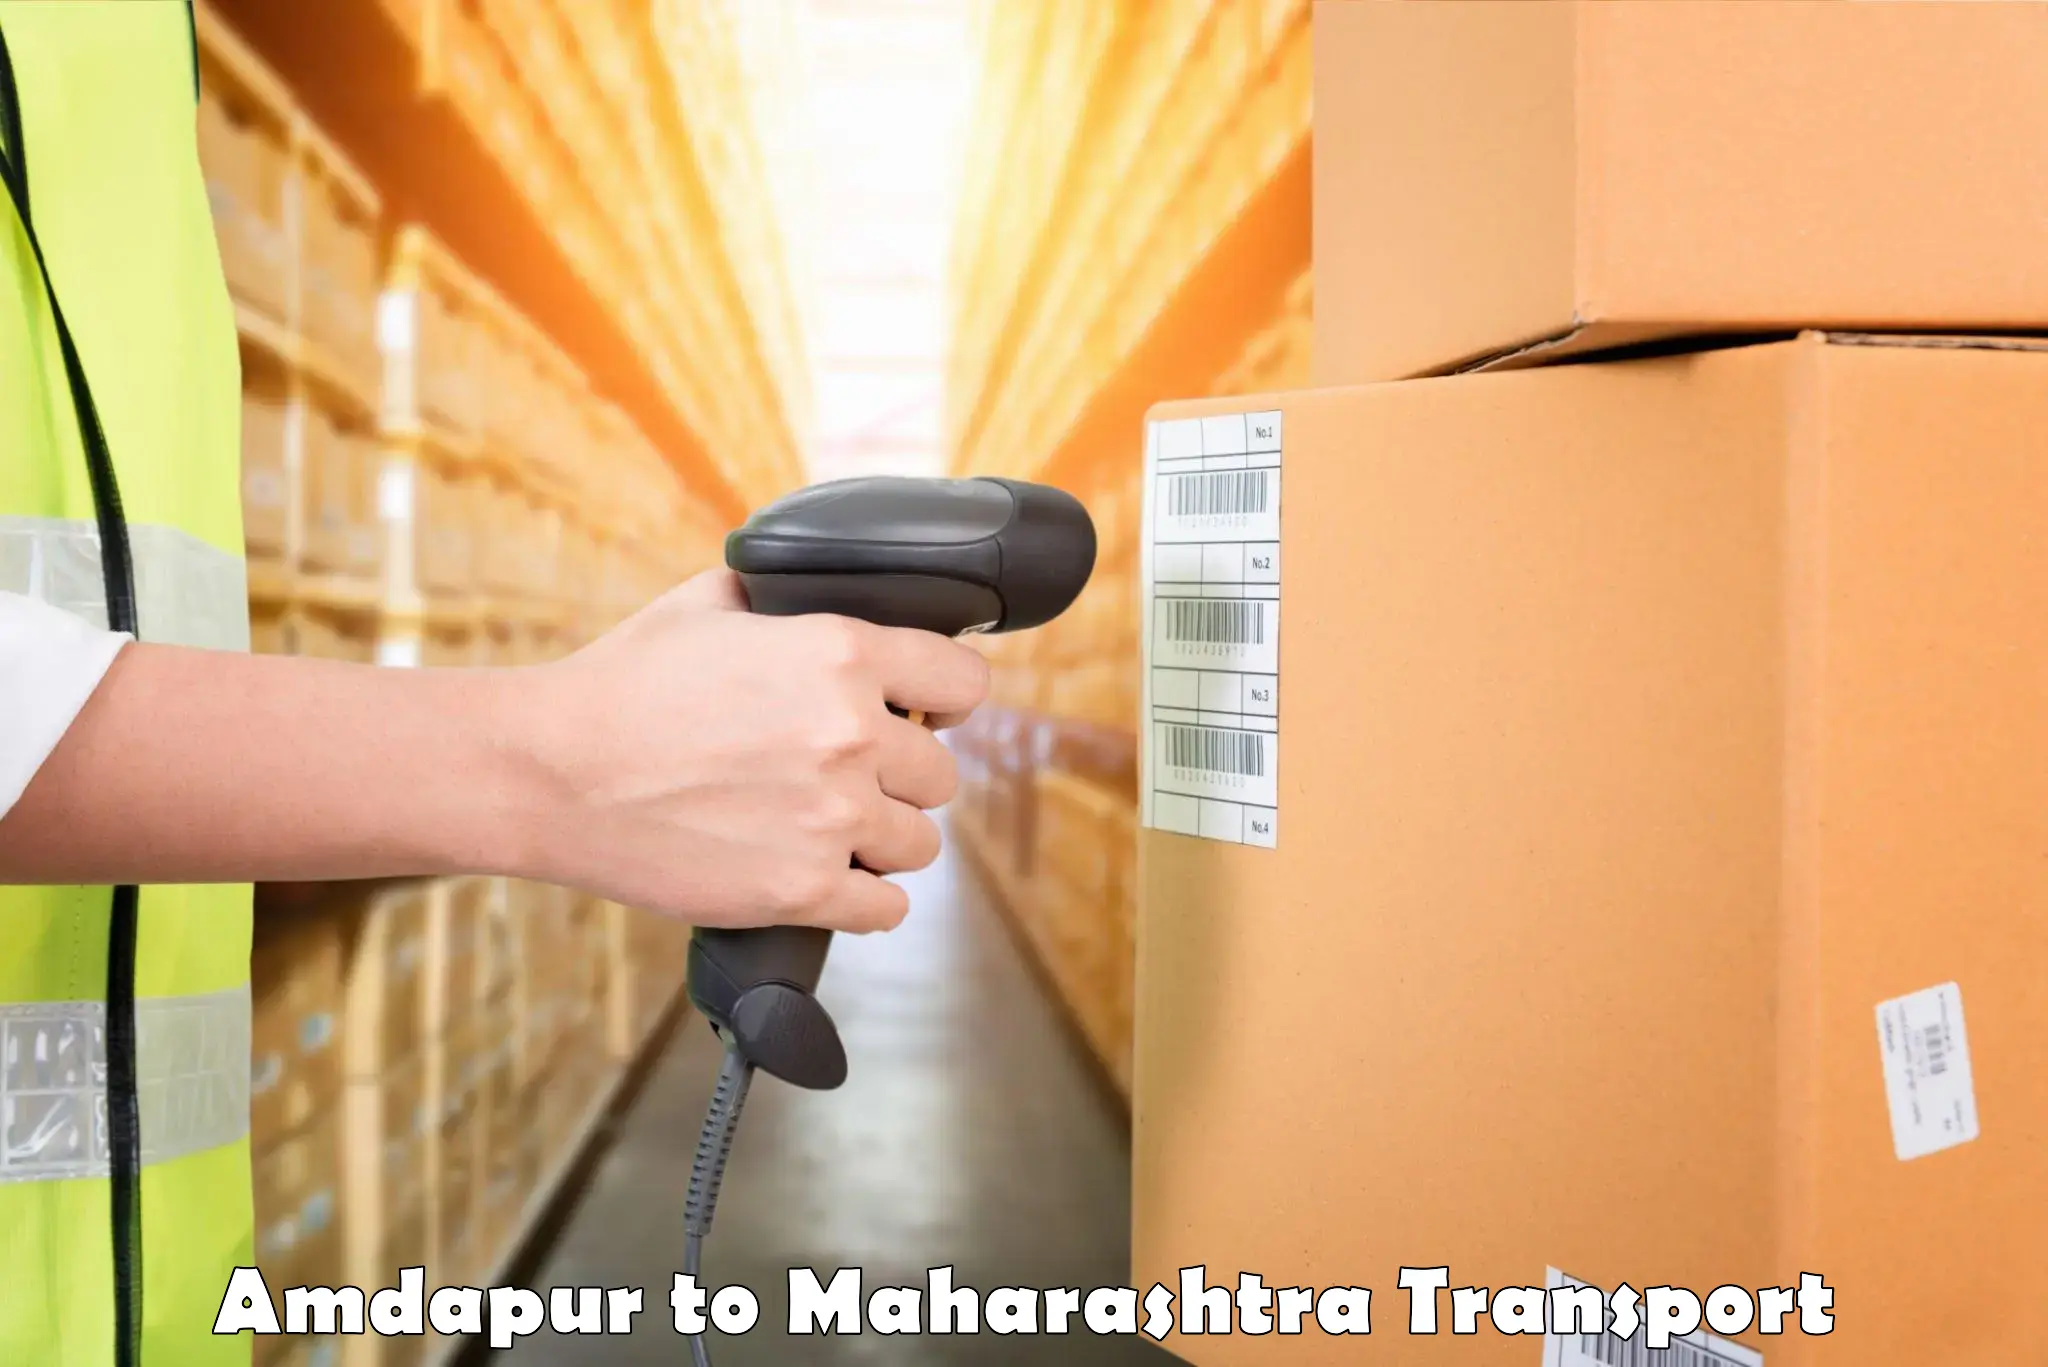 Goods delivery service Amdapur to Pusad